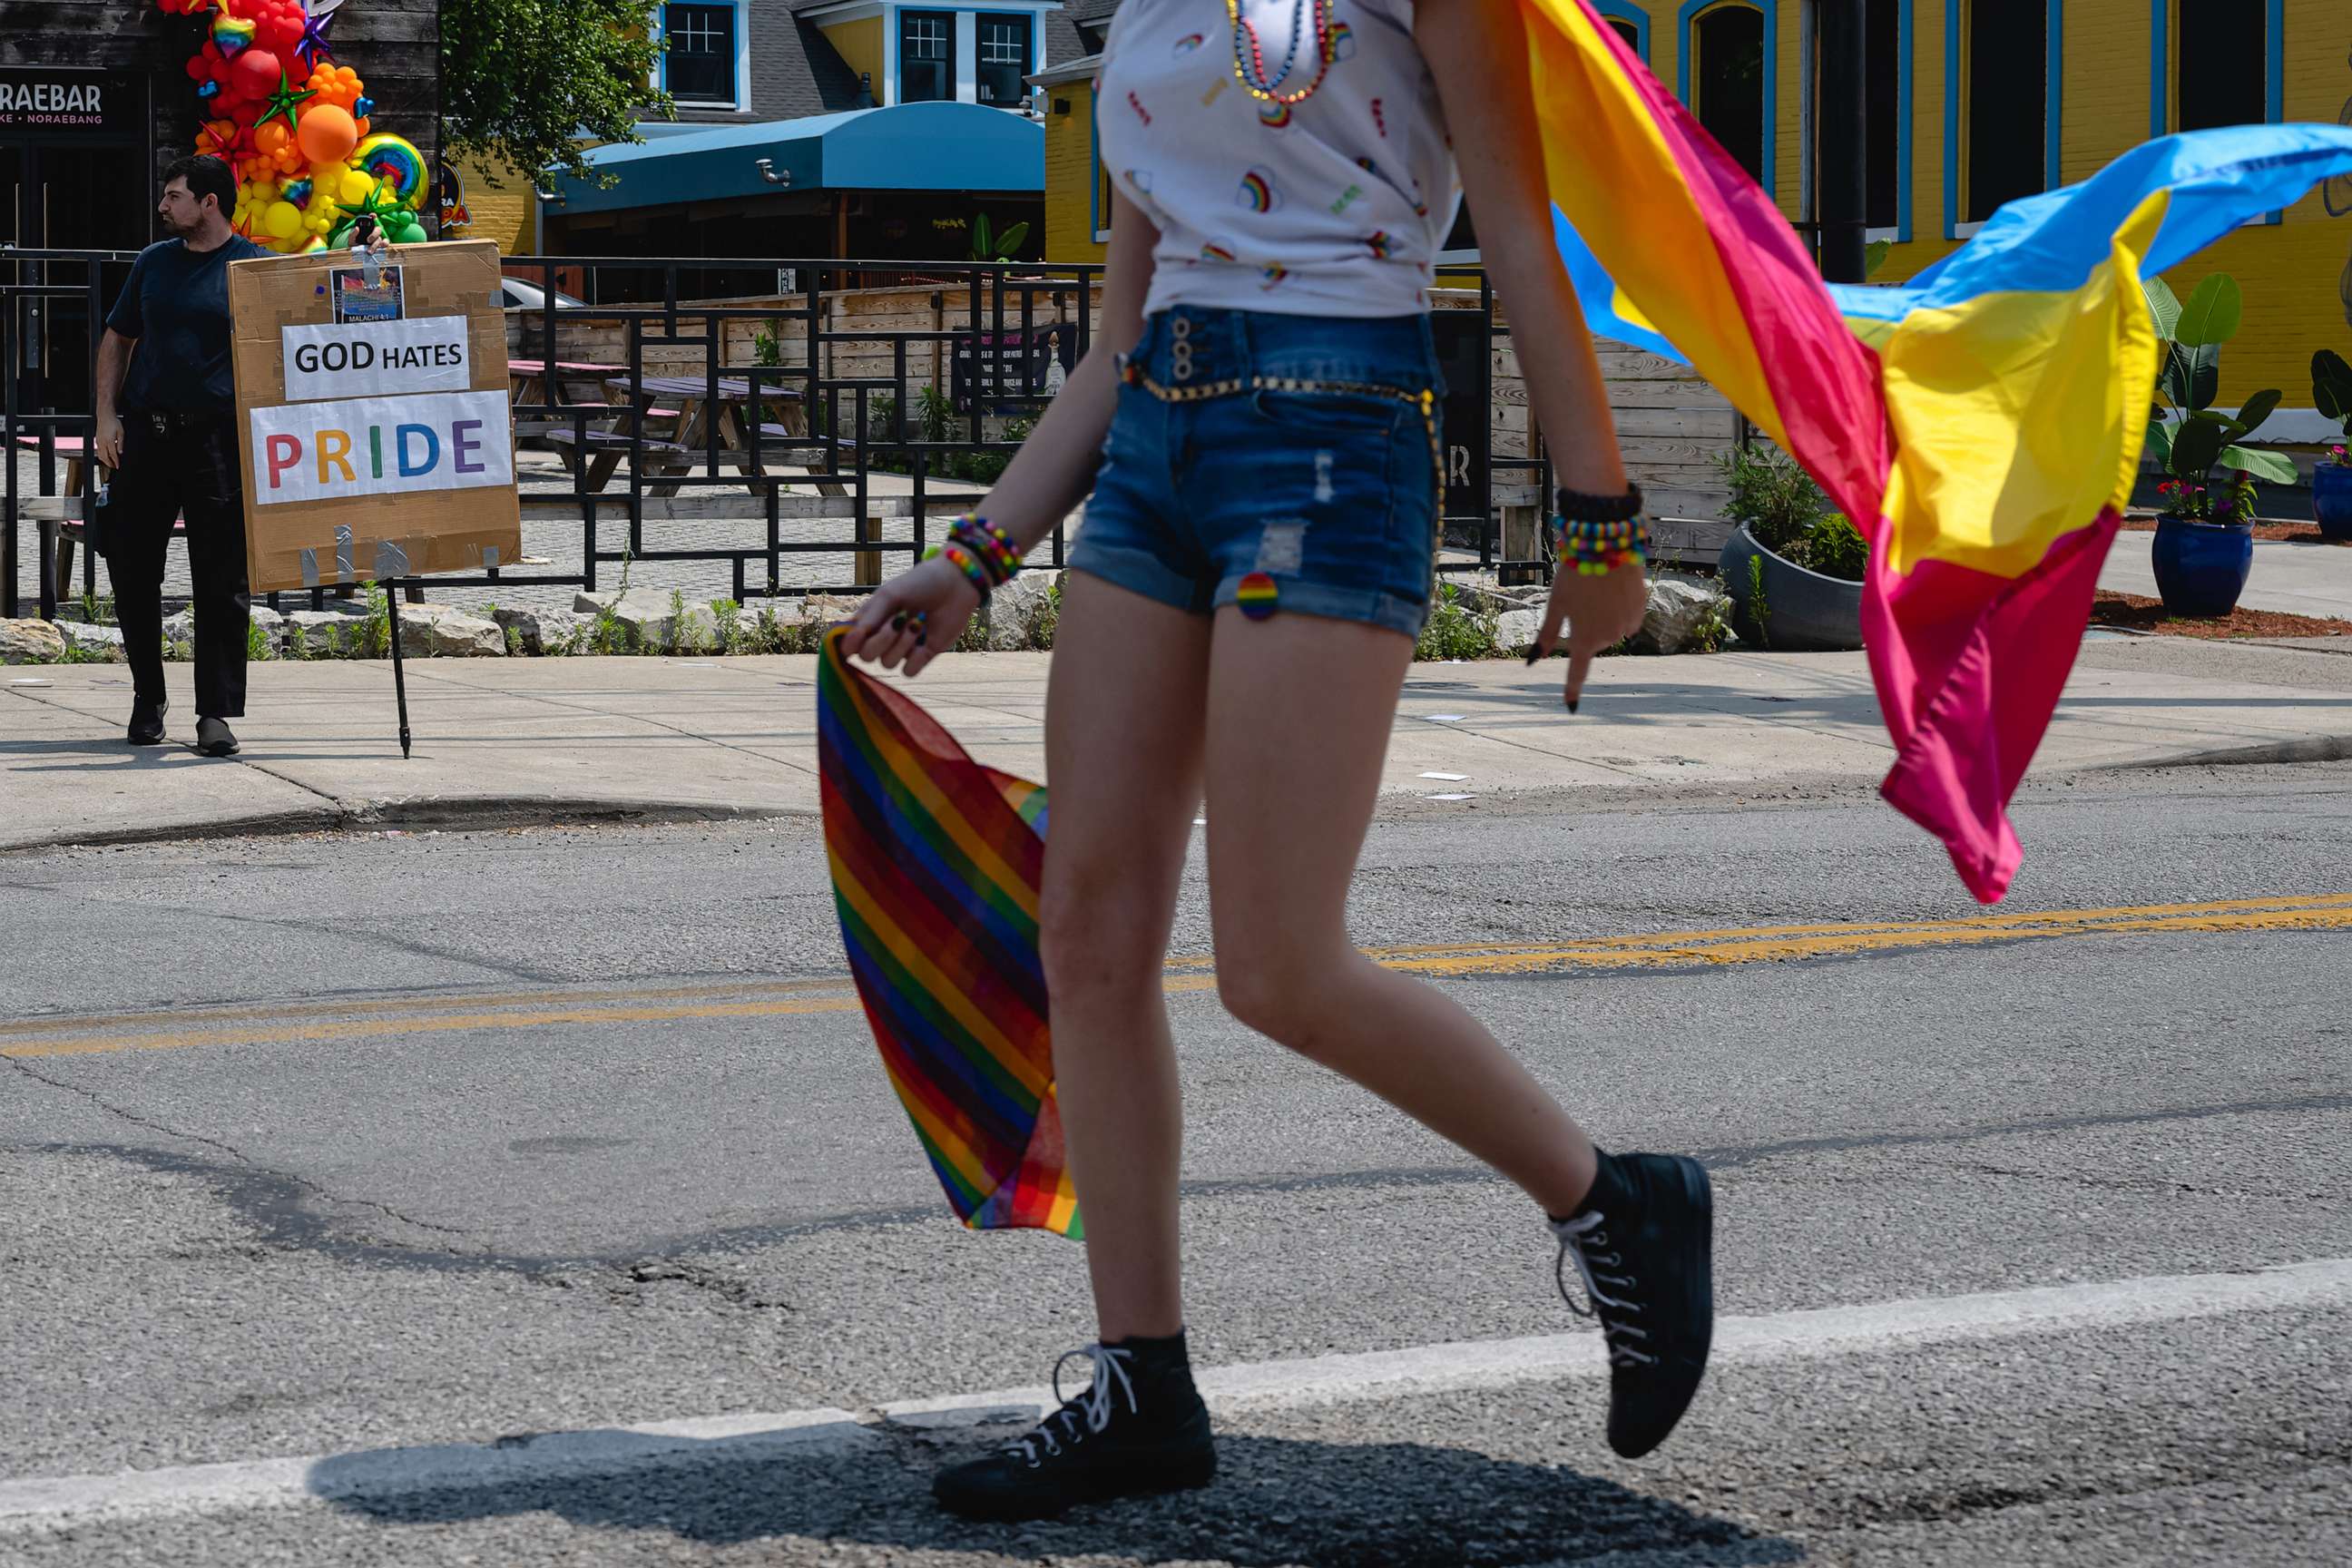 PHOTO: A protester holds a sign reading "GOD HATES PRIDE" as parade participants pass during the Kentuckiana Pride Parade, June 17, 2023, in Louisville, Ky.